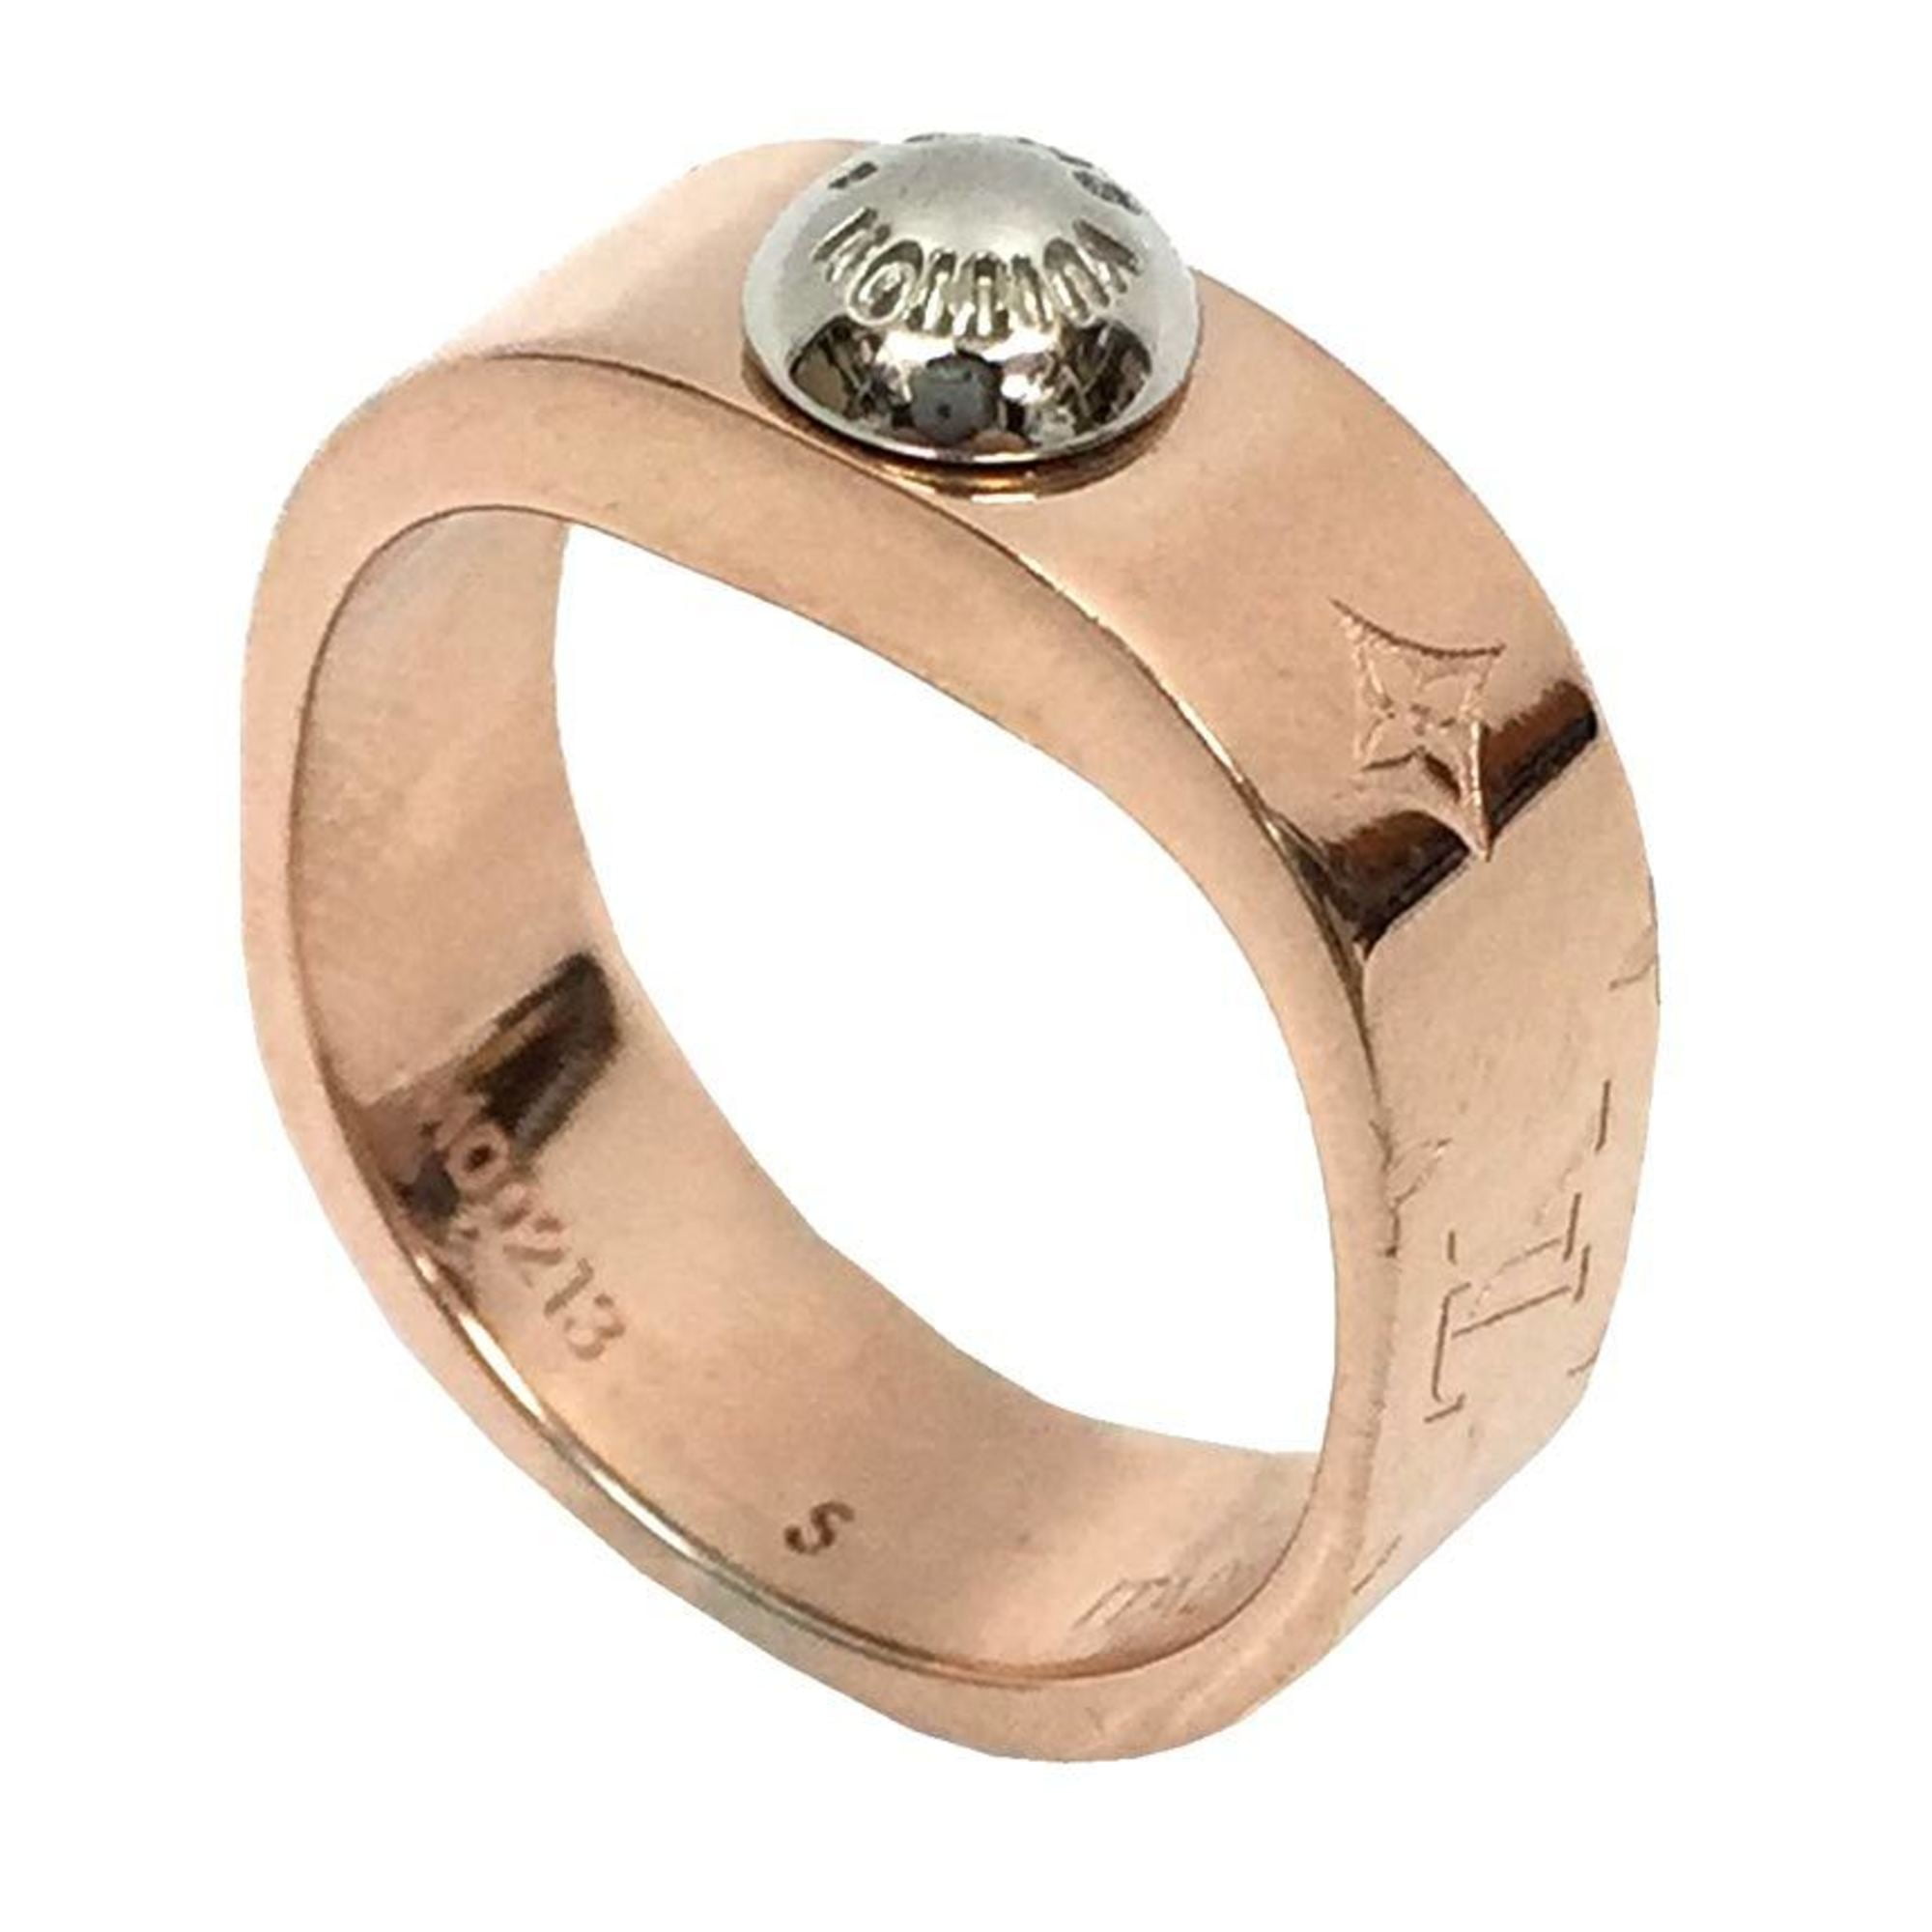 Authenticated Used Louis Vuitton ring nanogram M00213 S size about